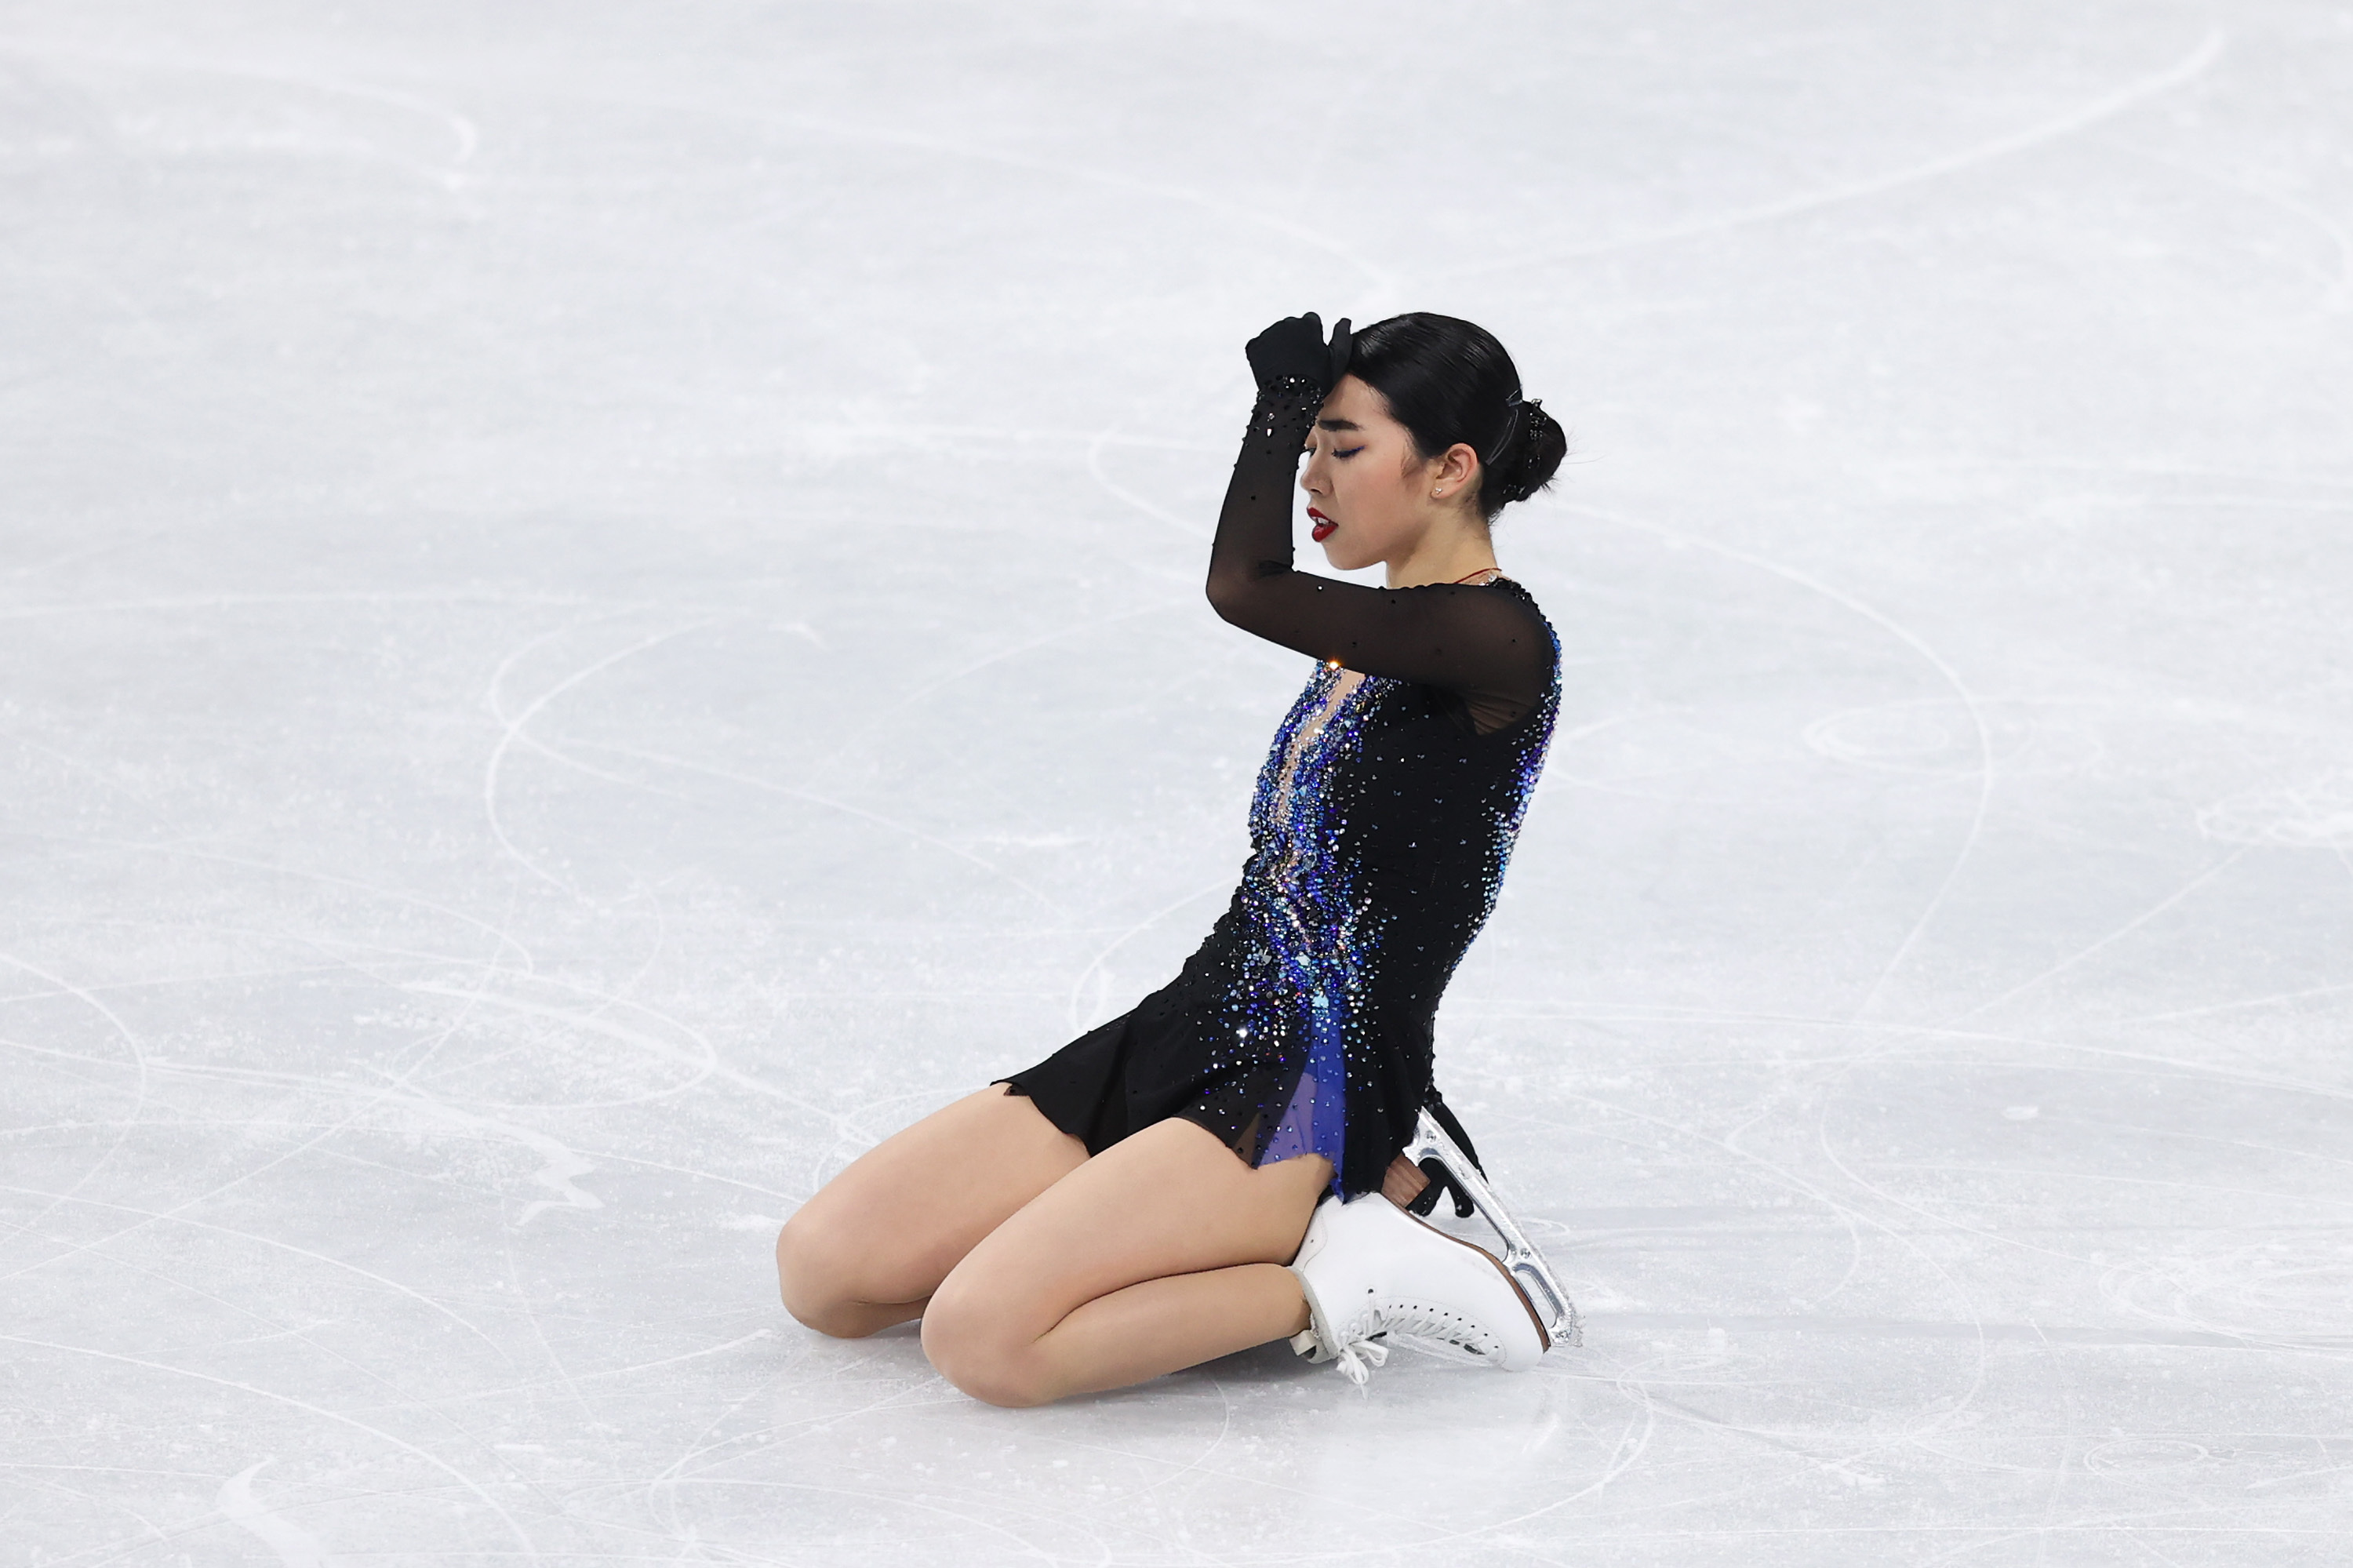 Ten million Americans tune in to watch Olympic figure skating